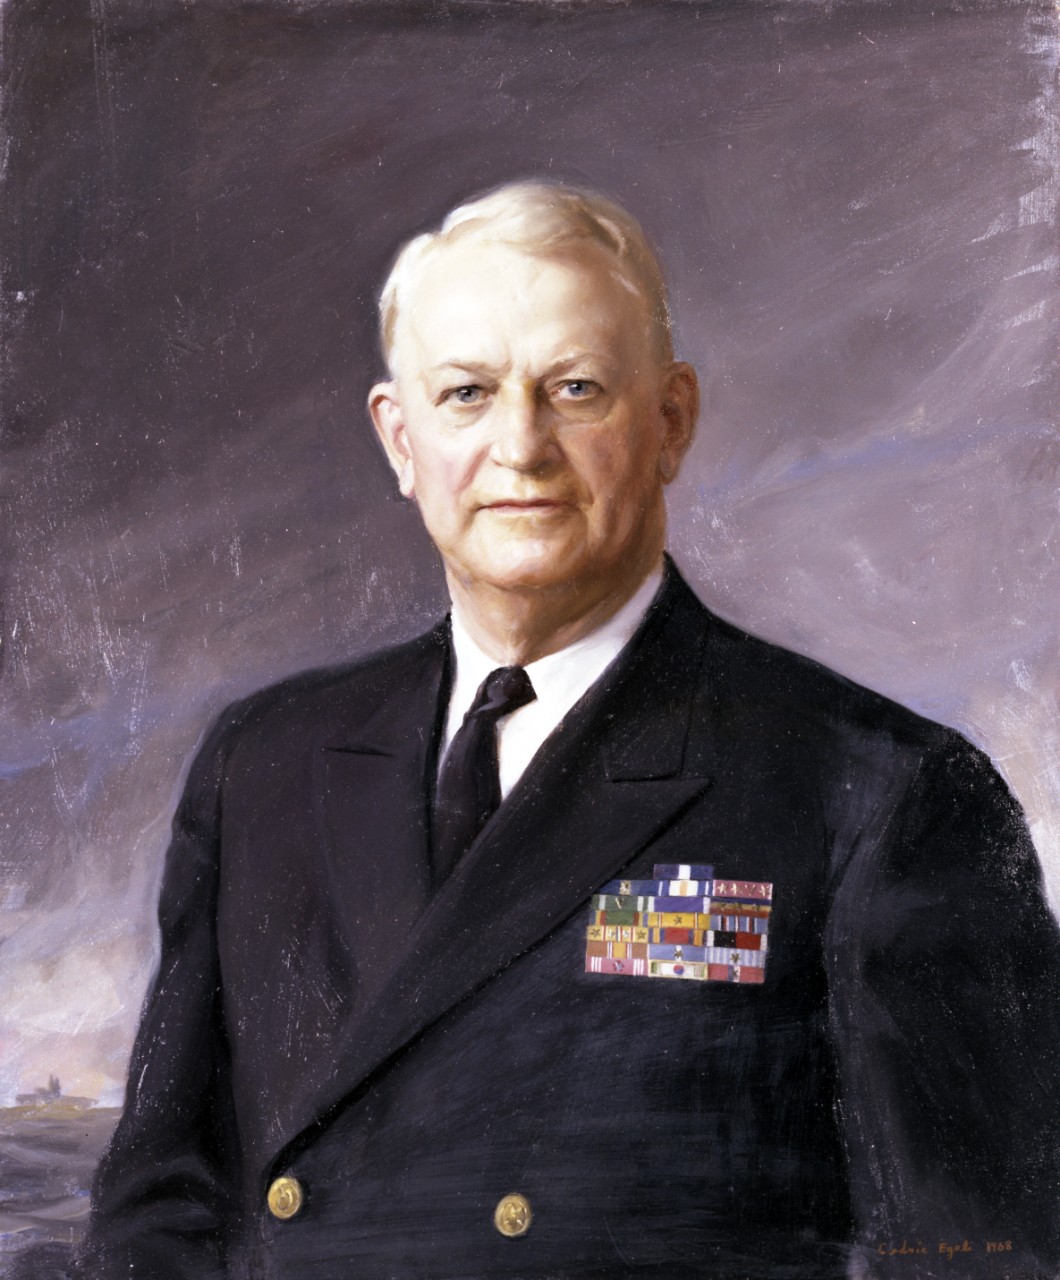 Admiral Arleigh A. Burke, Chief of Naval Operations, 1955-1961 Portrait by Cedric Egeli, 1968.   Courtesy of the Naval Art Gallery.  